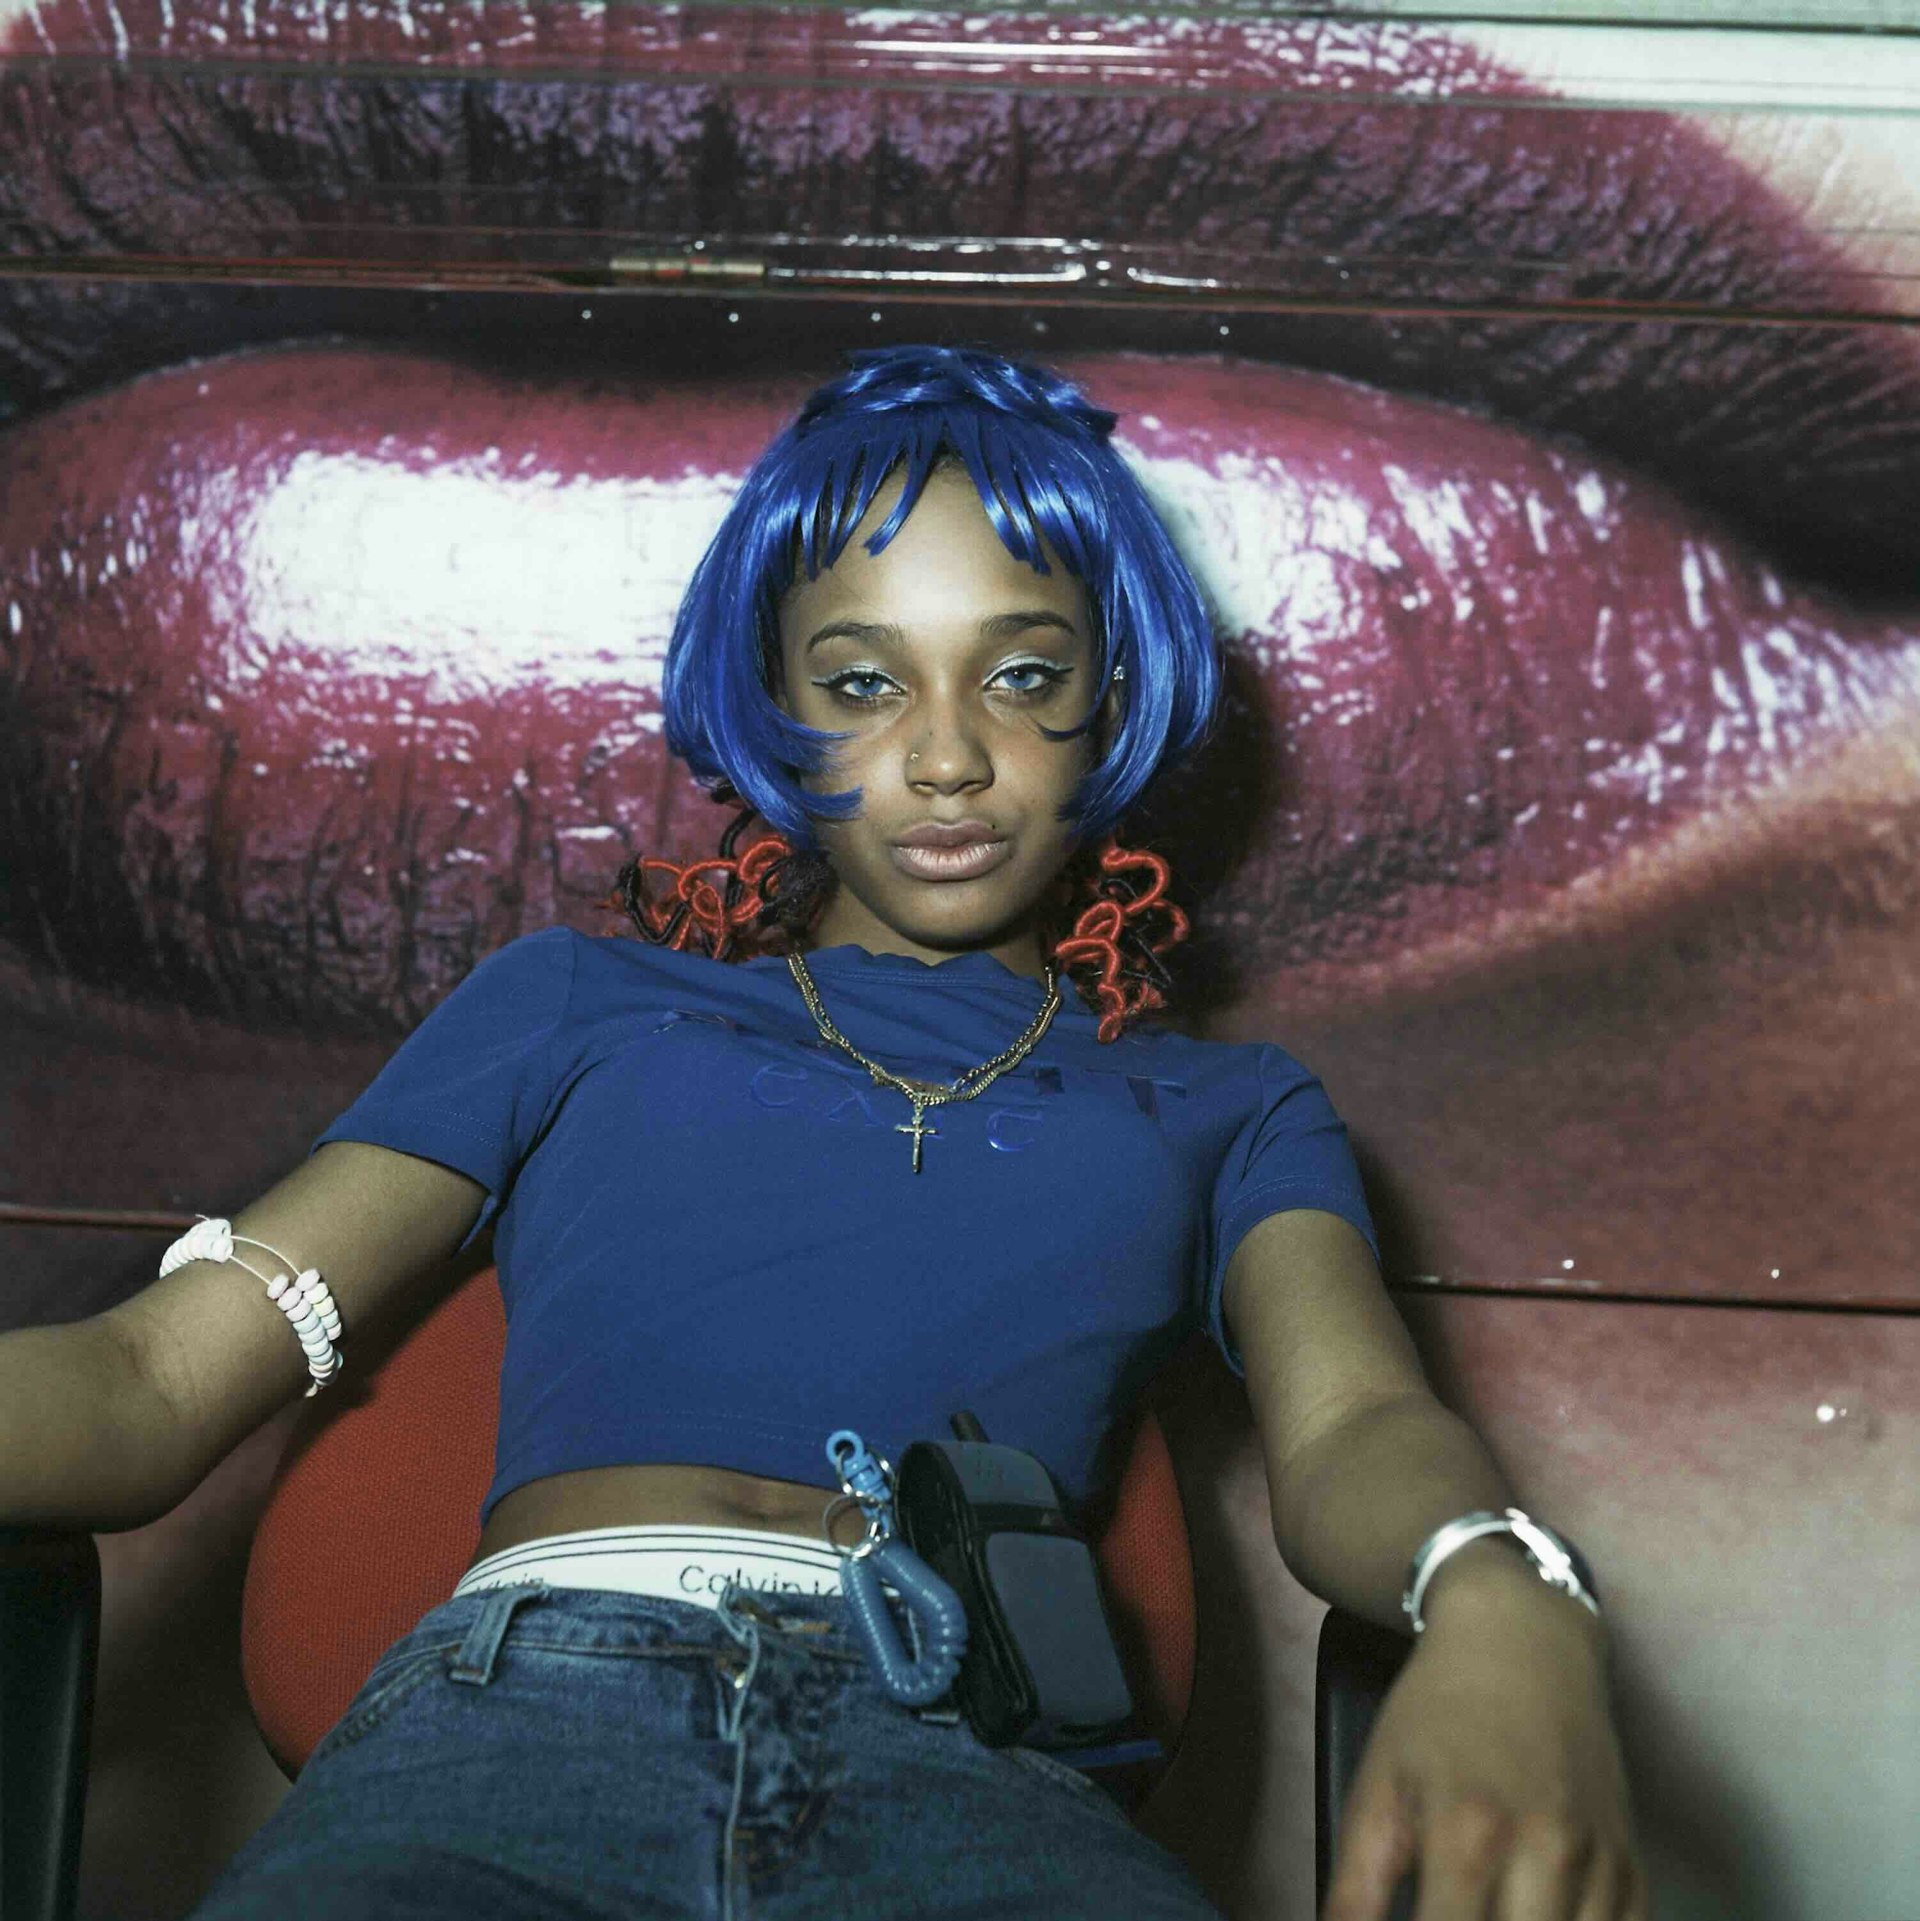 In Photos: Untold stories of Black British fashion and style